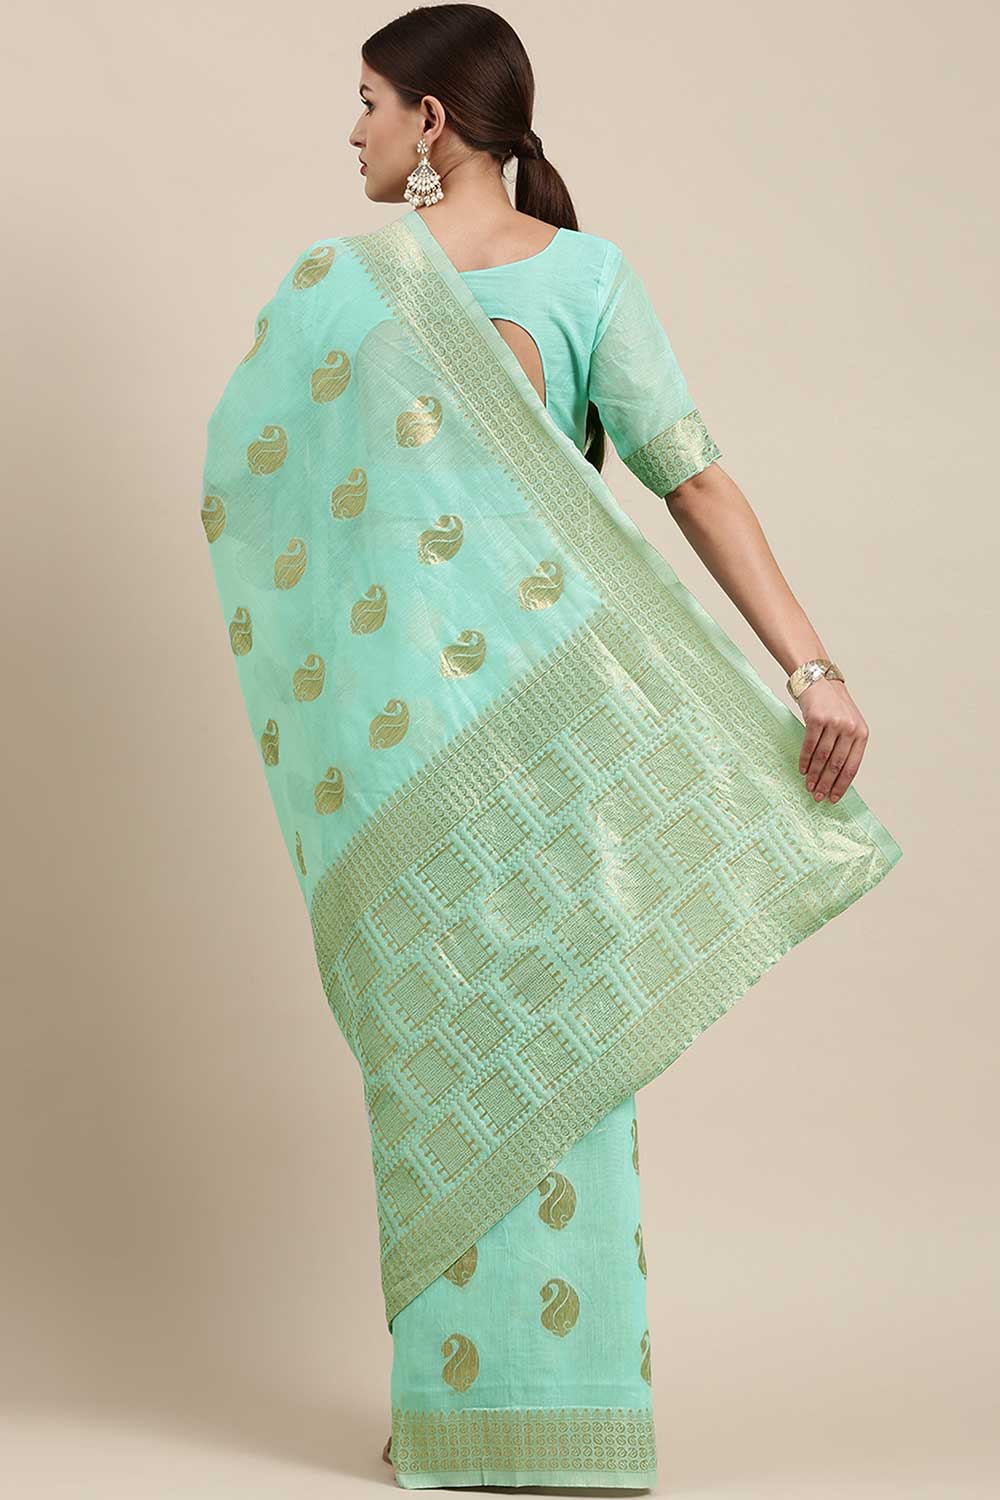 Shop Sahara Sea Green Bagh Blended Linen One Minute Saree at best offer at our  Store - One Minute Saree